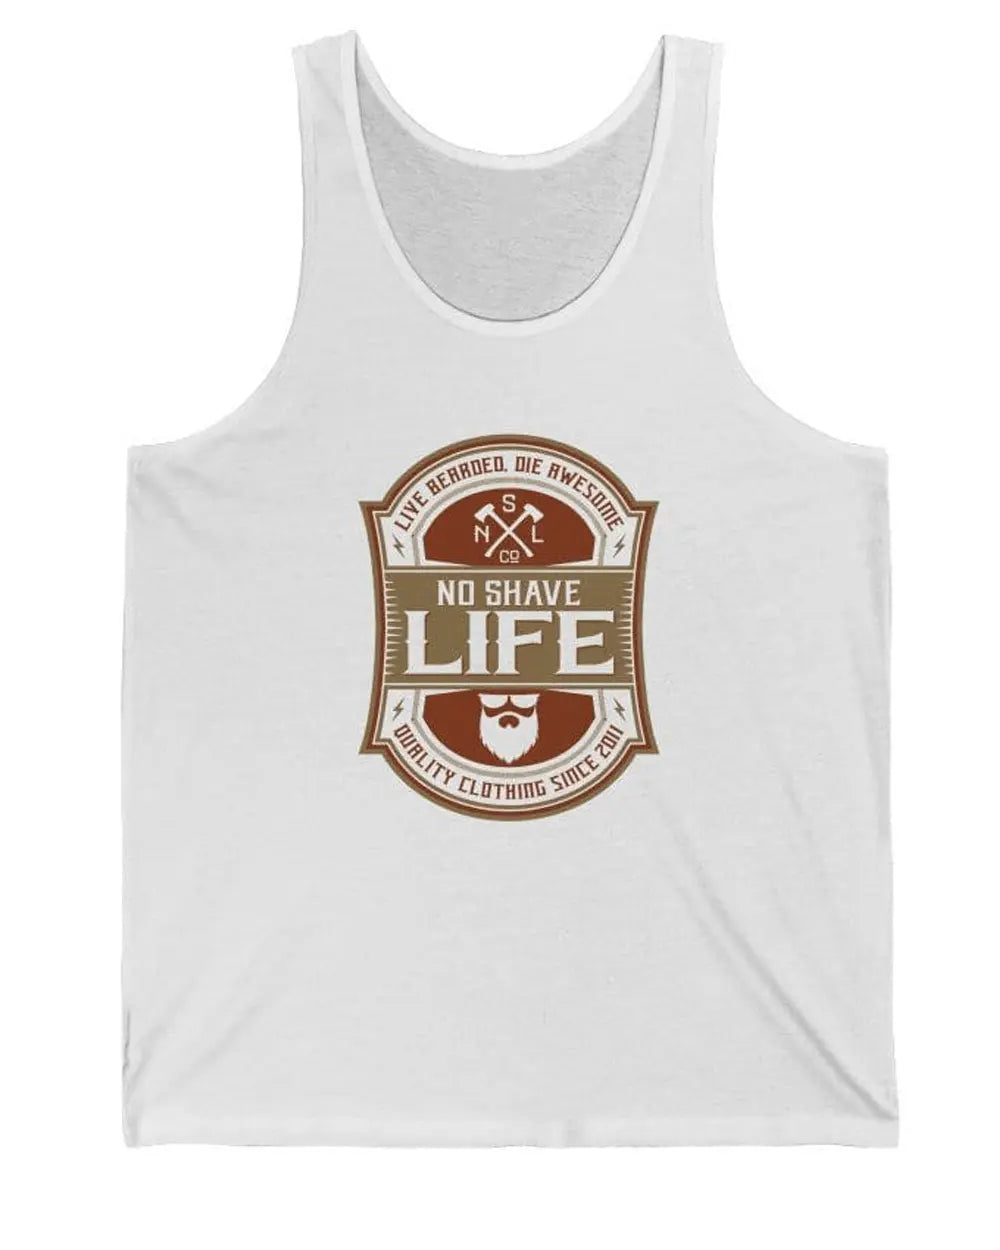 Live Bearded, Die Awesome White Men's Tank Top|Mens Tank Top